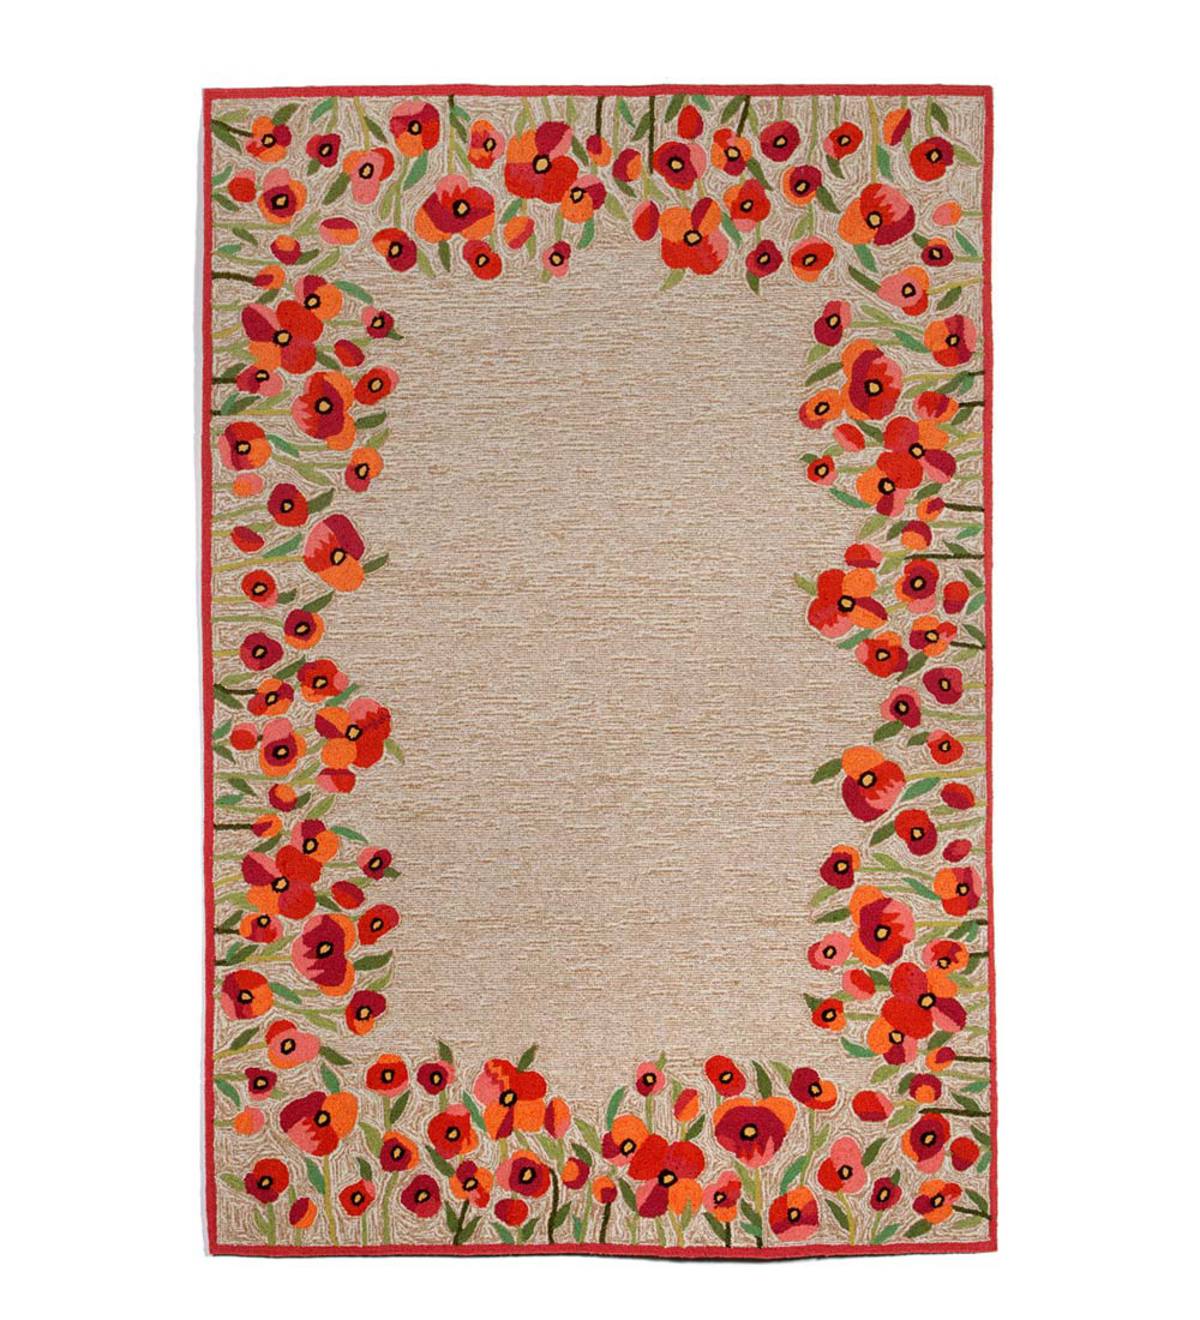 Red Poppies Border Accent Rug, 8'3"W x 11'6"L